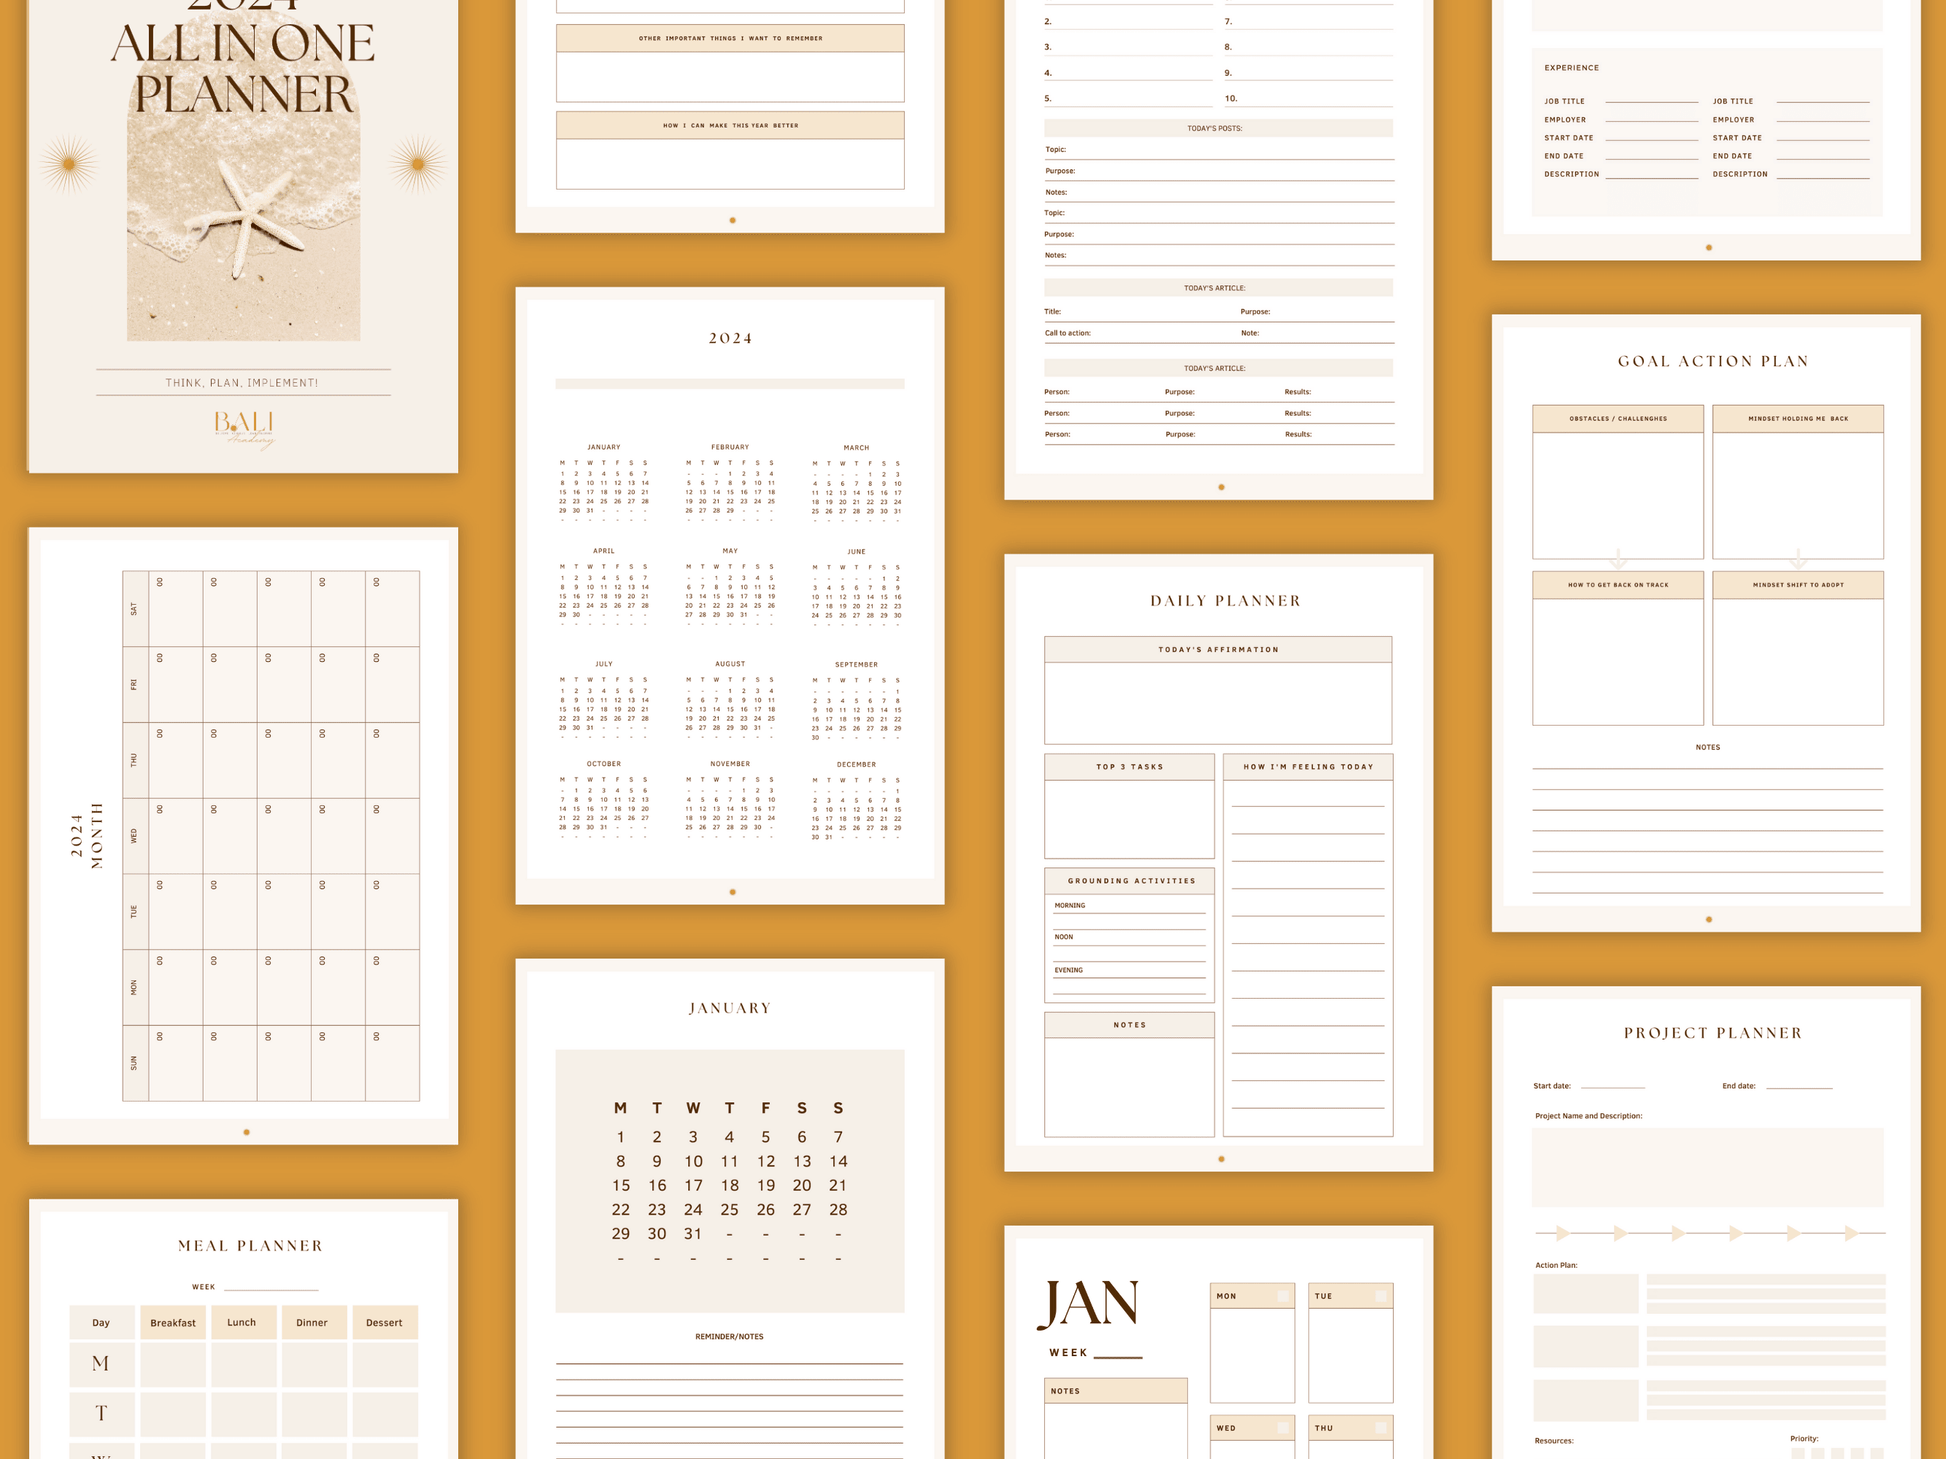 Aesthetic and boho All in One done-for-you 2024 planner templates which include e.g. meal planner, daily planner, project planner, etc. for content creators and business owners. It's editable in Canva.